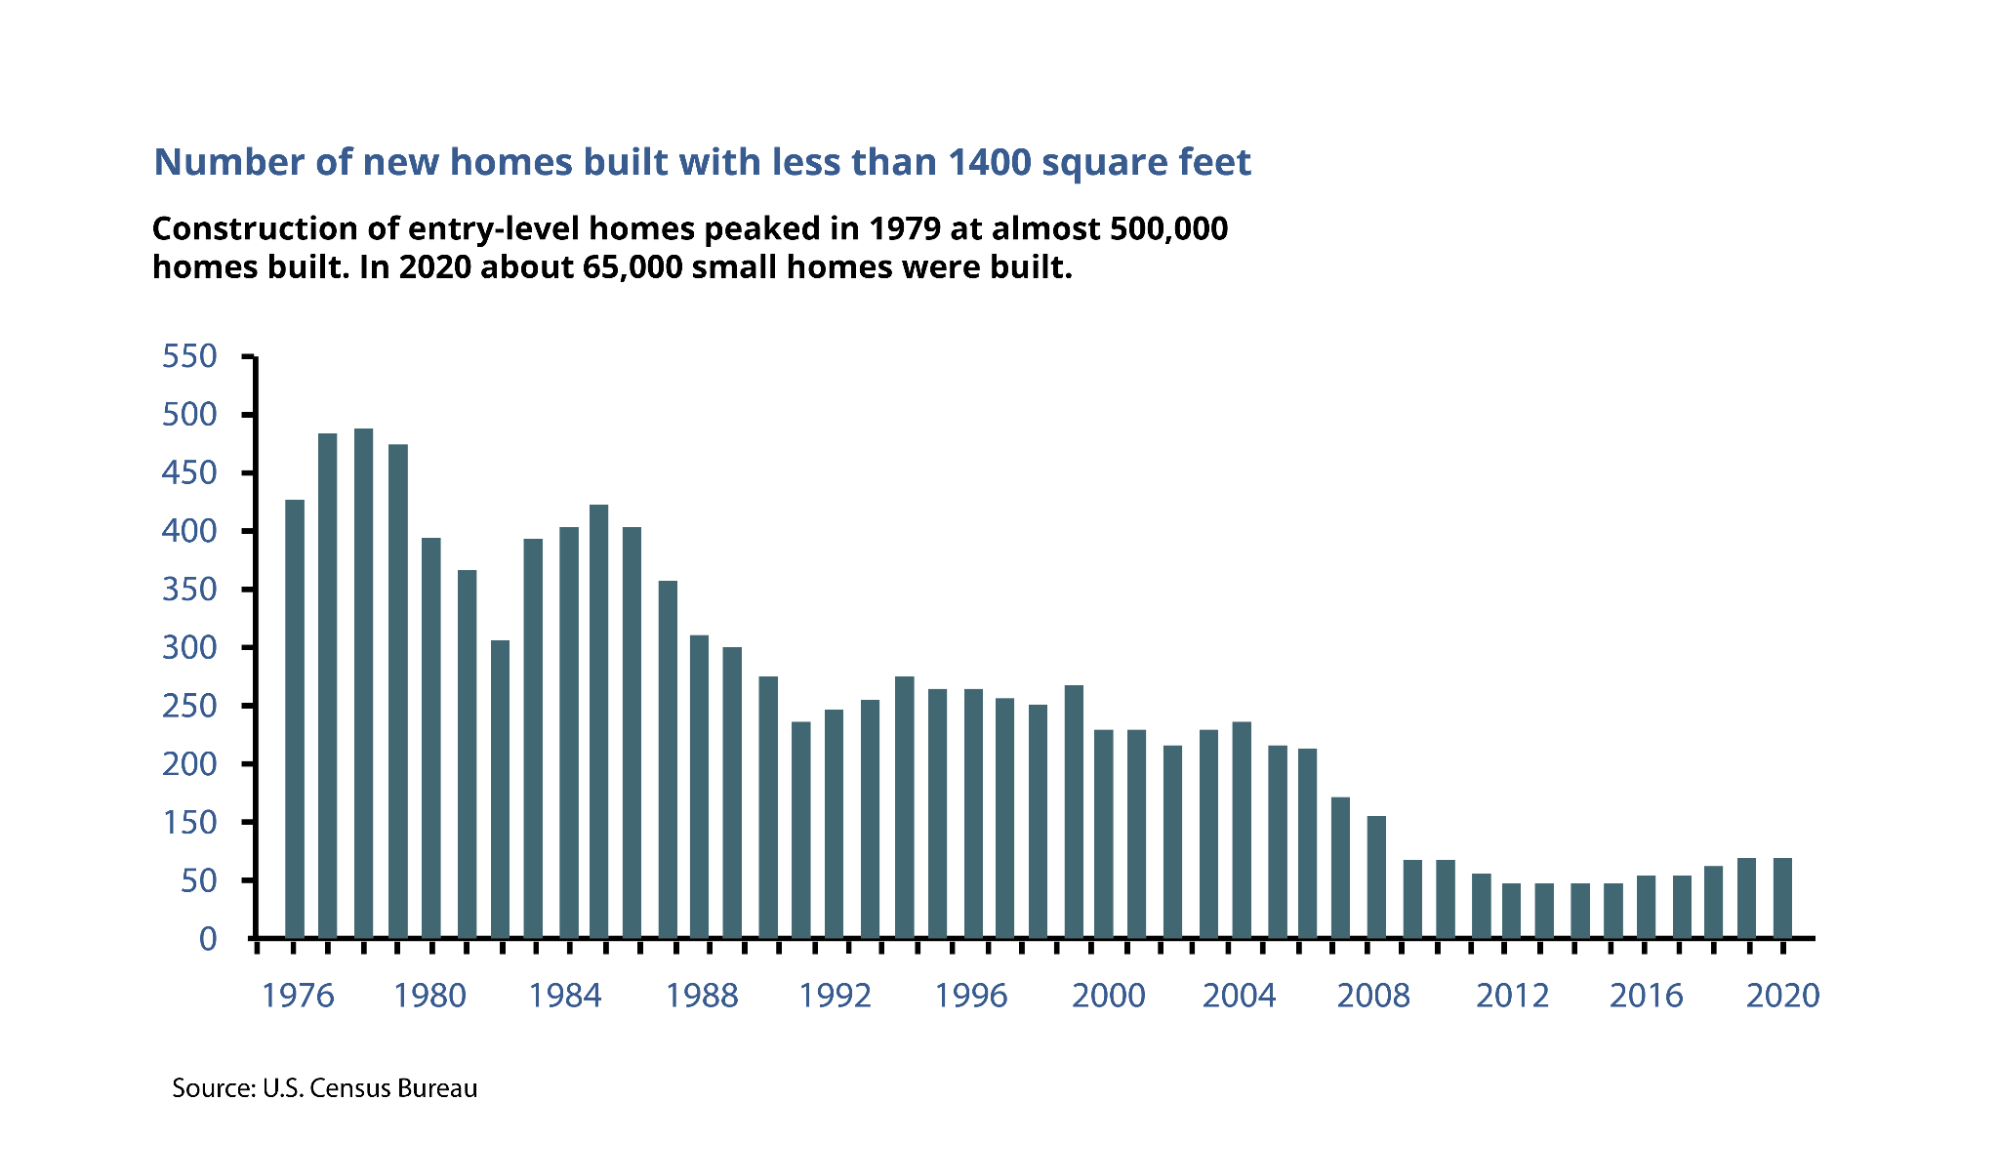 Graph showing number of new homes built under 1400 square feet